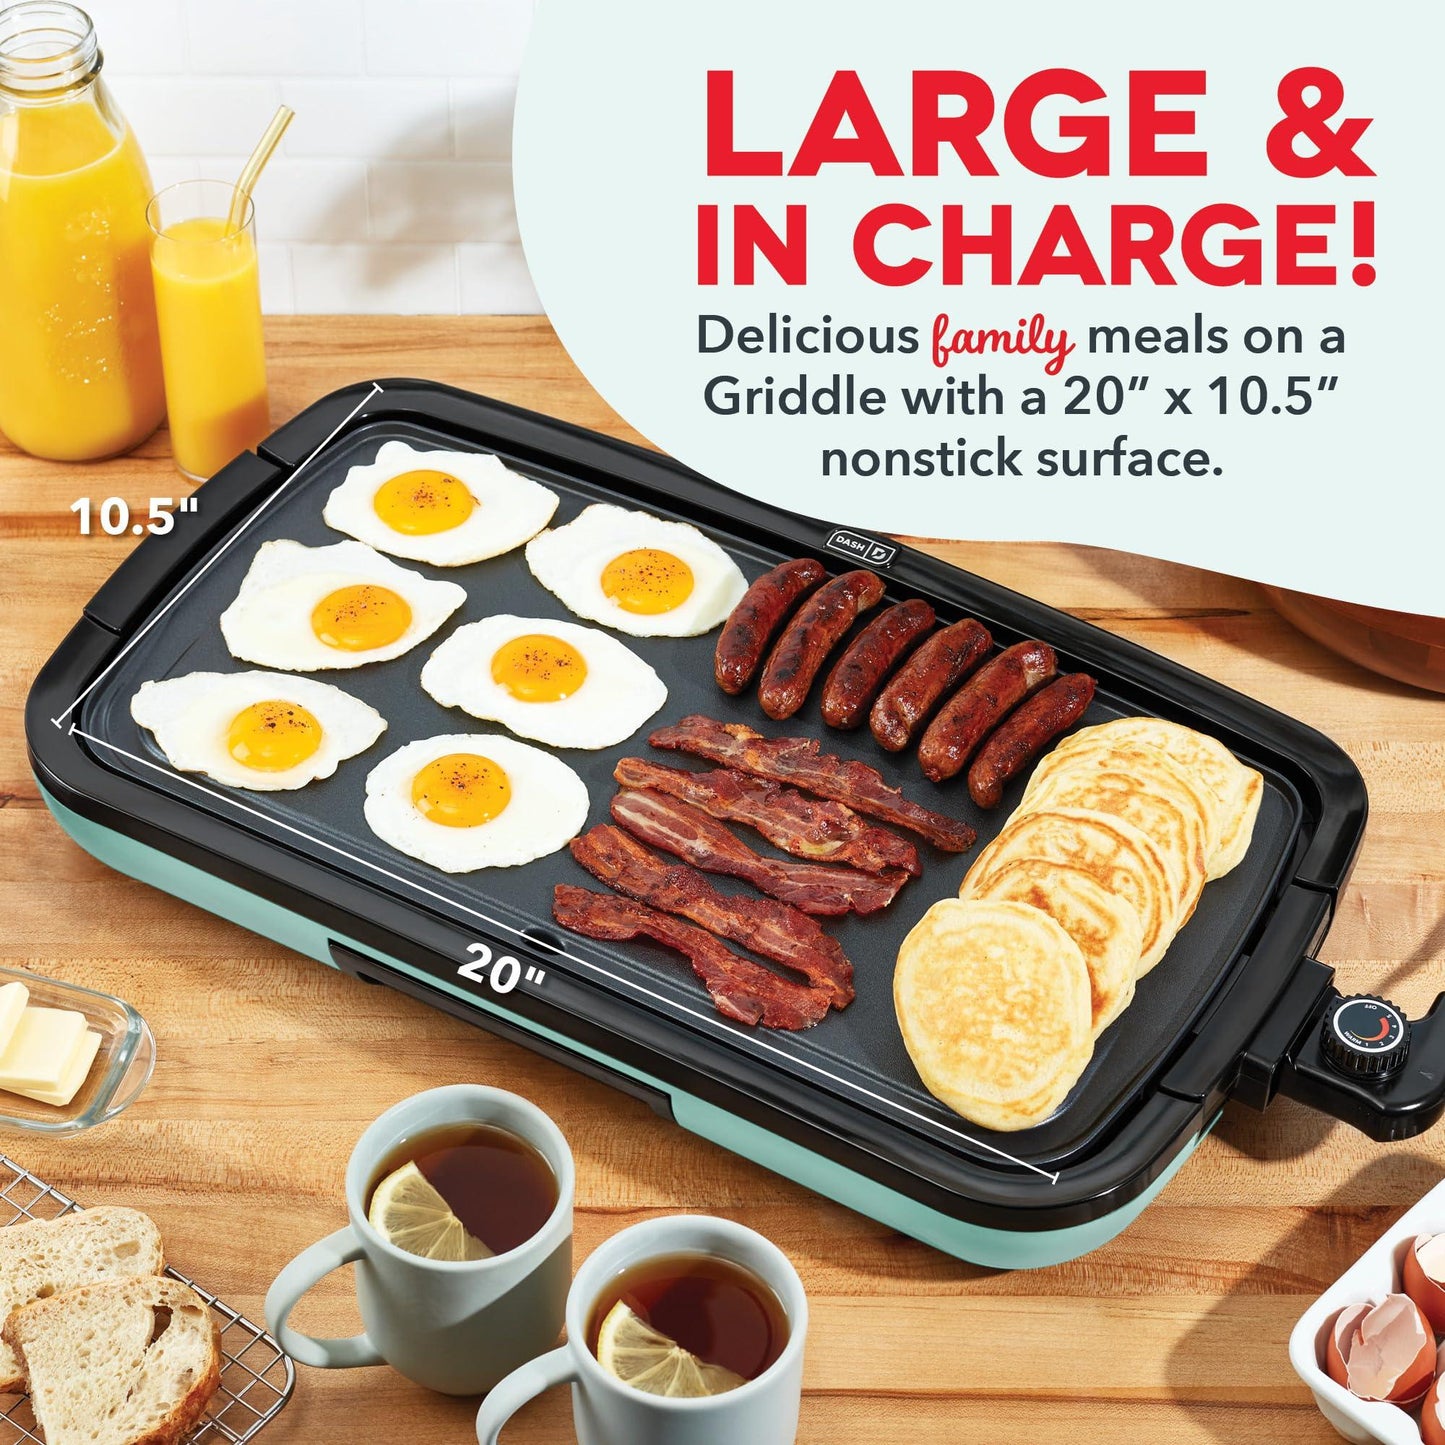 DASH Deluxe Everyday Electric Griddle with Dishwasher Safe Removable Nonstick Cooking Plate for Pancakes, Burgers, Eggs and more, Includes Drip Tray + Recipe Book, 20” x 10.5”, 1500-Watt - Aqua - CookCave